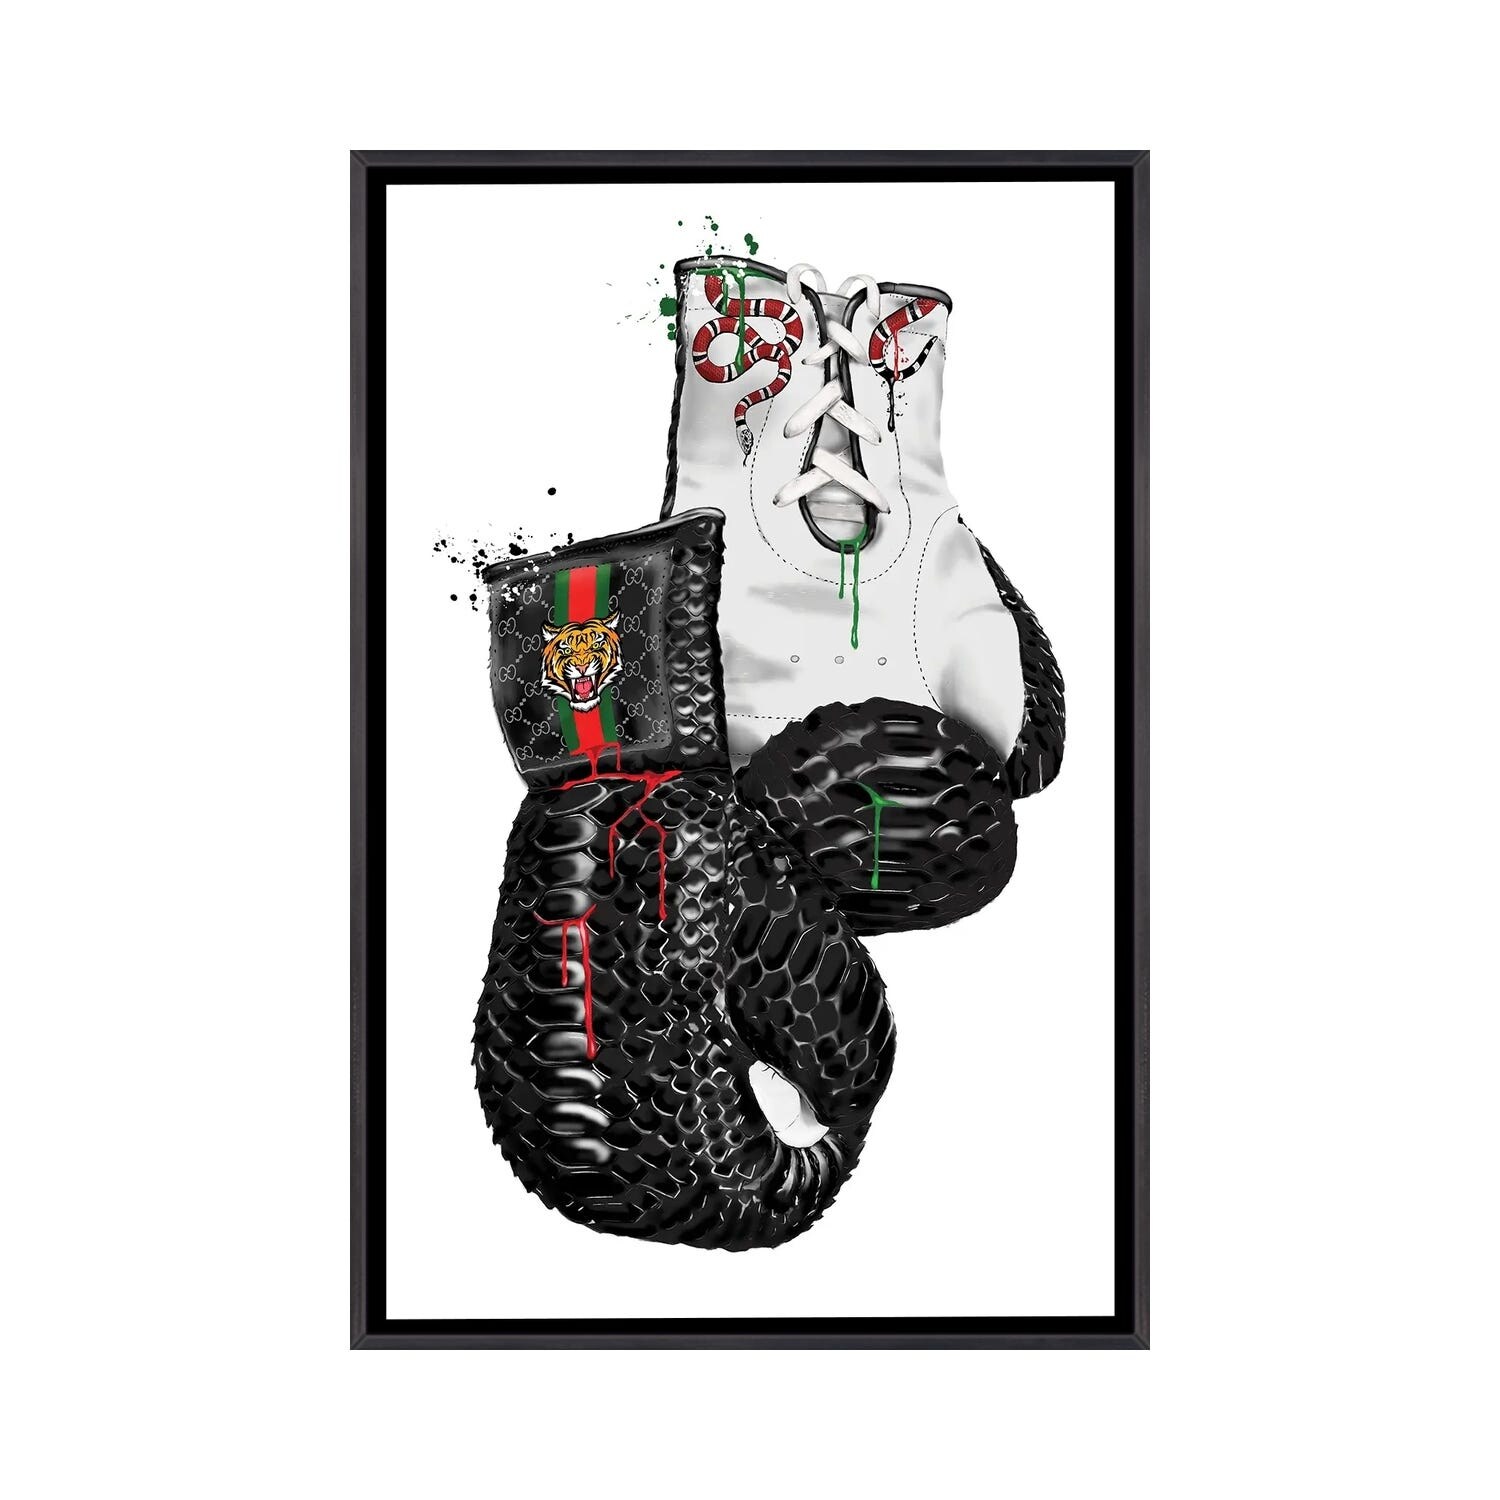 GUCCI BOXING GLOVES – Elias Mikael